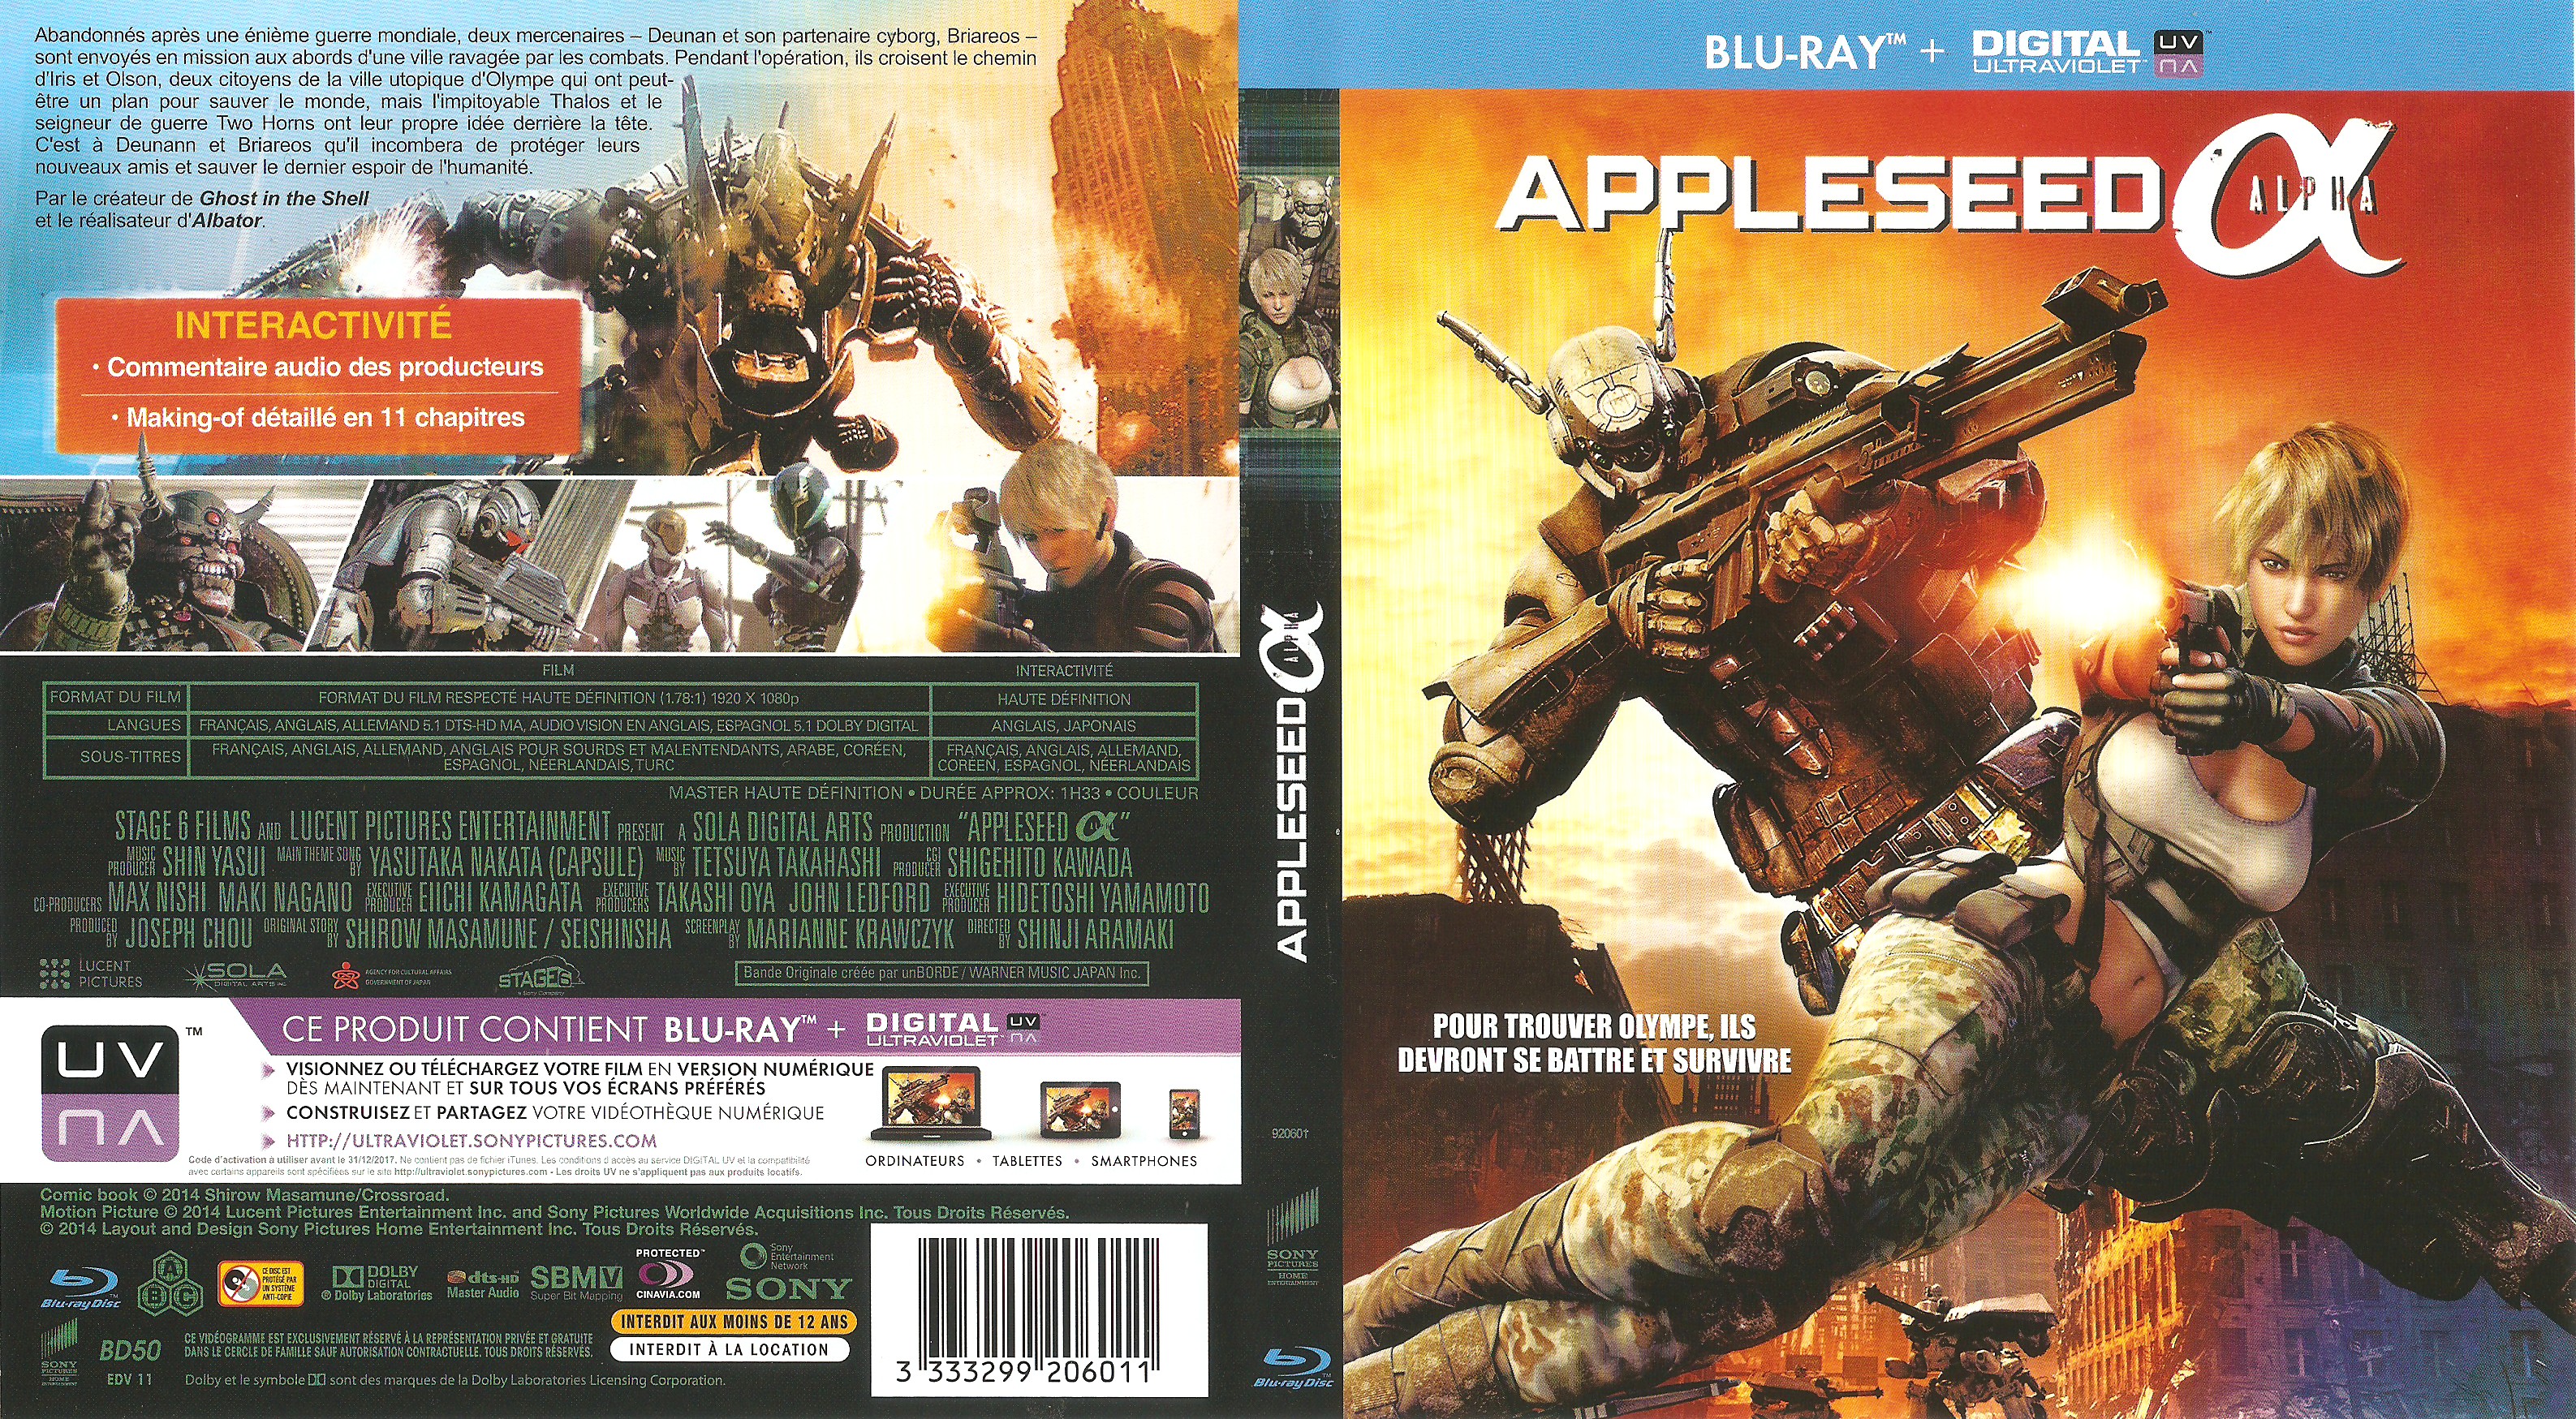 Jaquette DVD Appleseed Alpha (BLU-RAY)